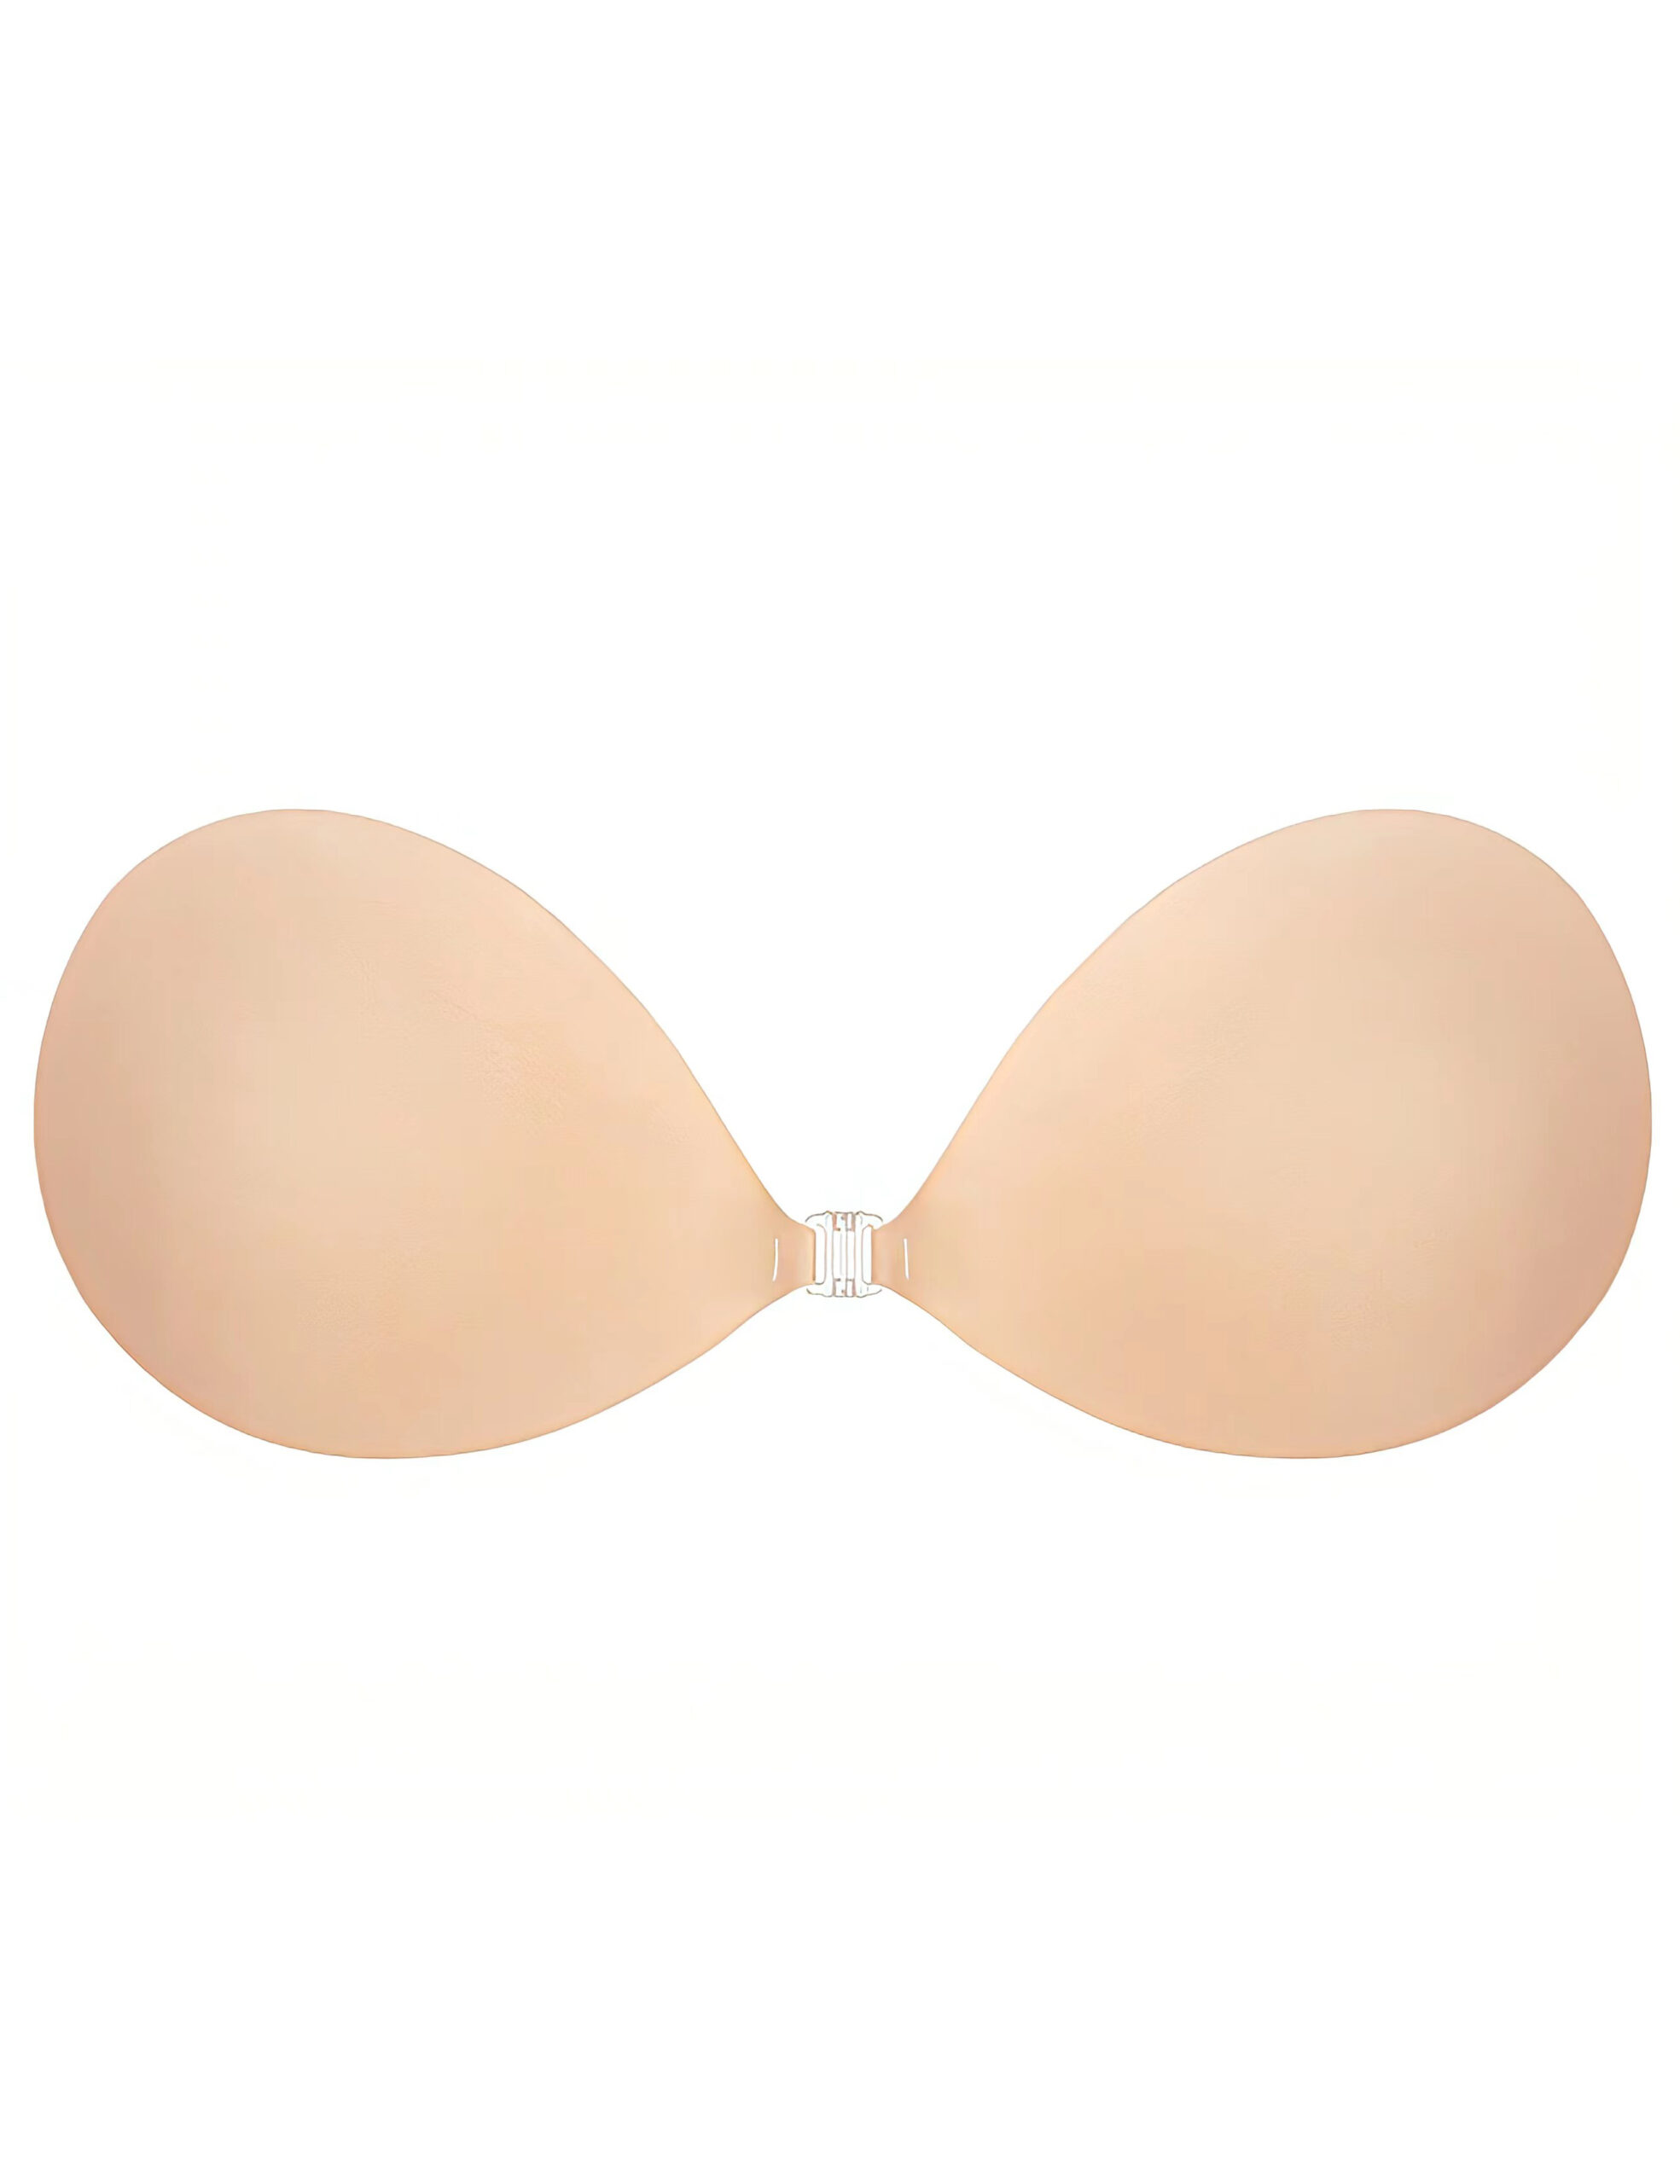 Strapless Backless Silicone Bra Seamless Extreme Push Up Sponge